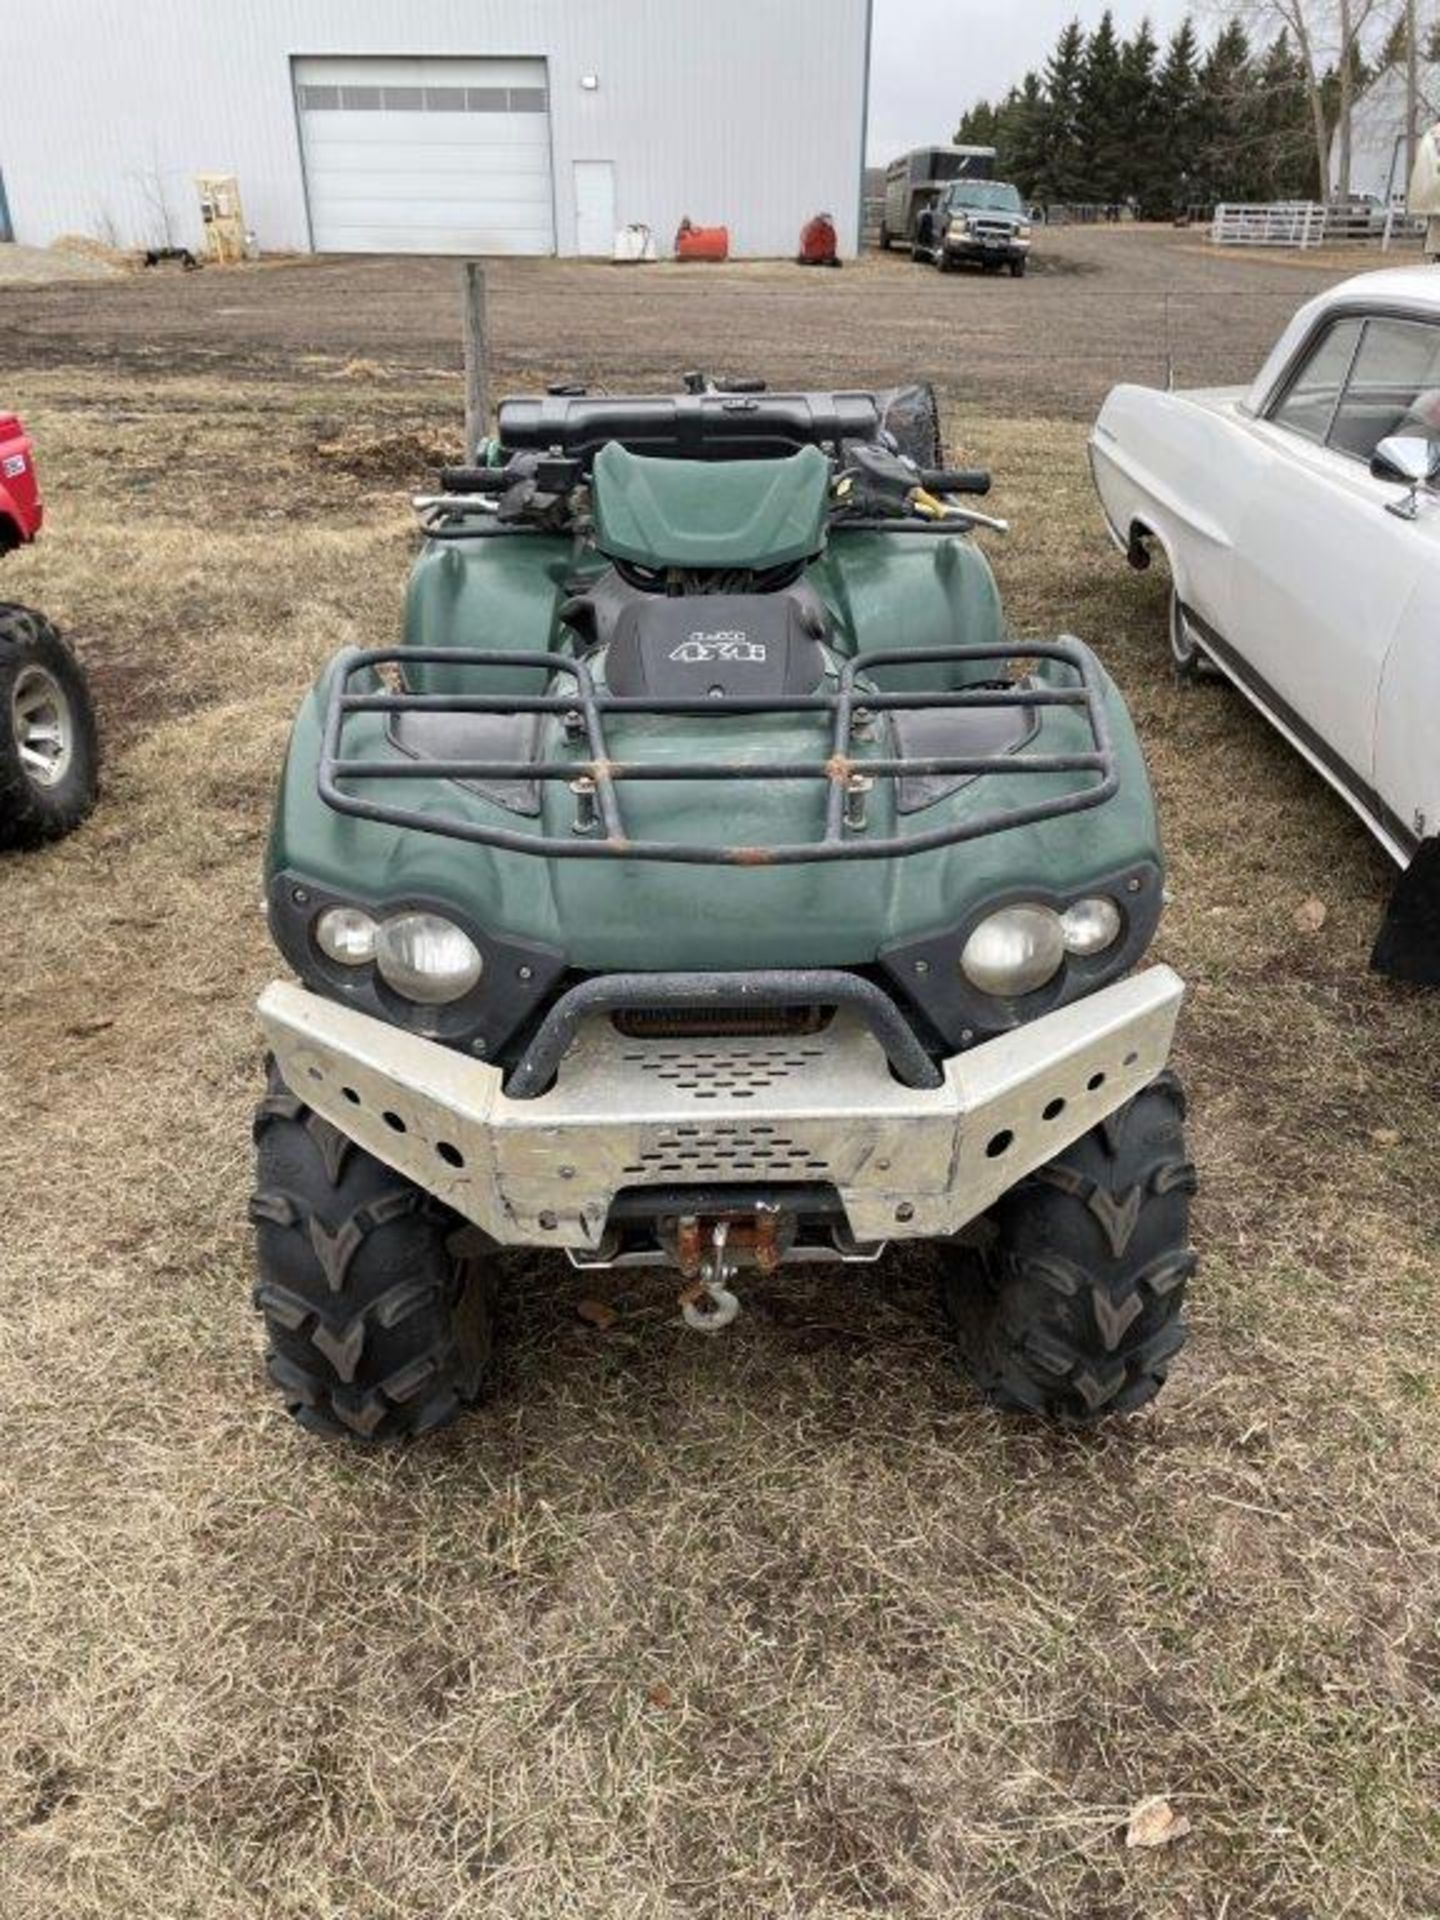 2007 KAWASAKI BRUTE FORCE 750 ATV 4X4 AUTO, RECENT CARB CLEAN, NEW BATTERY, 1762 KM'S SHOWING - Image 12 of 19